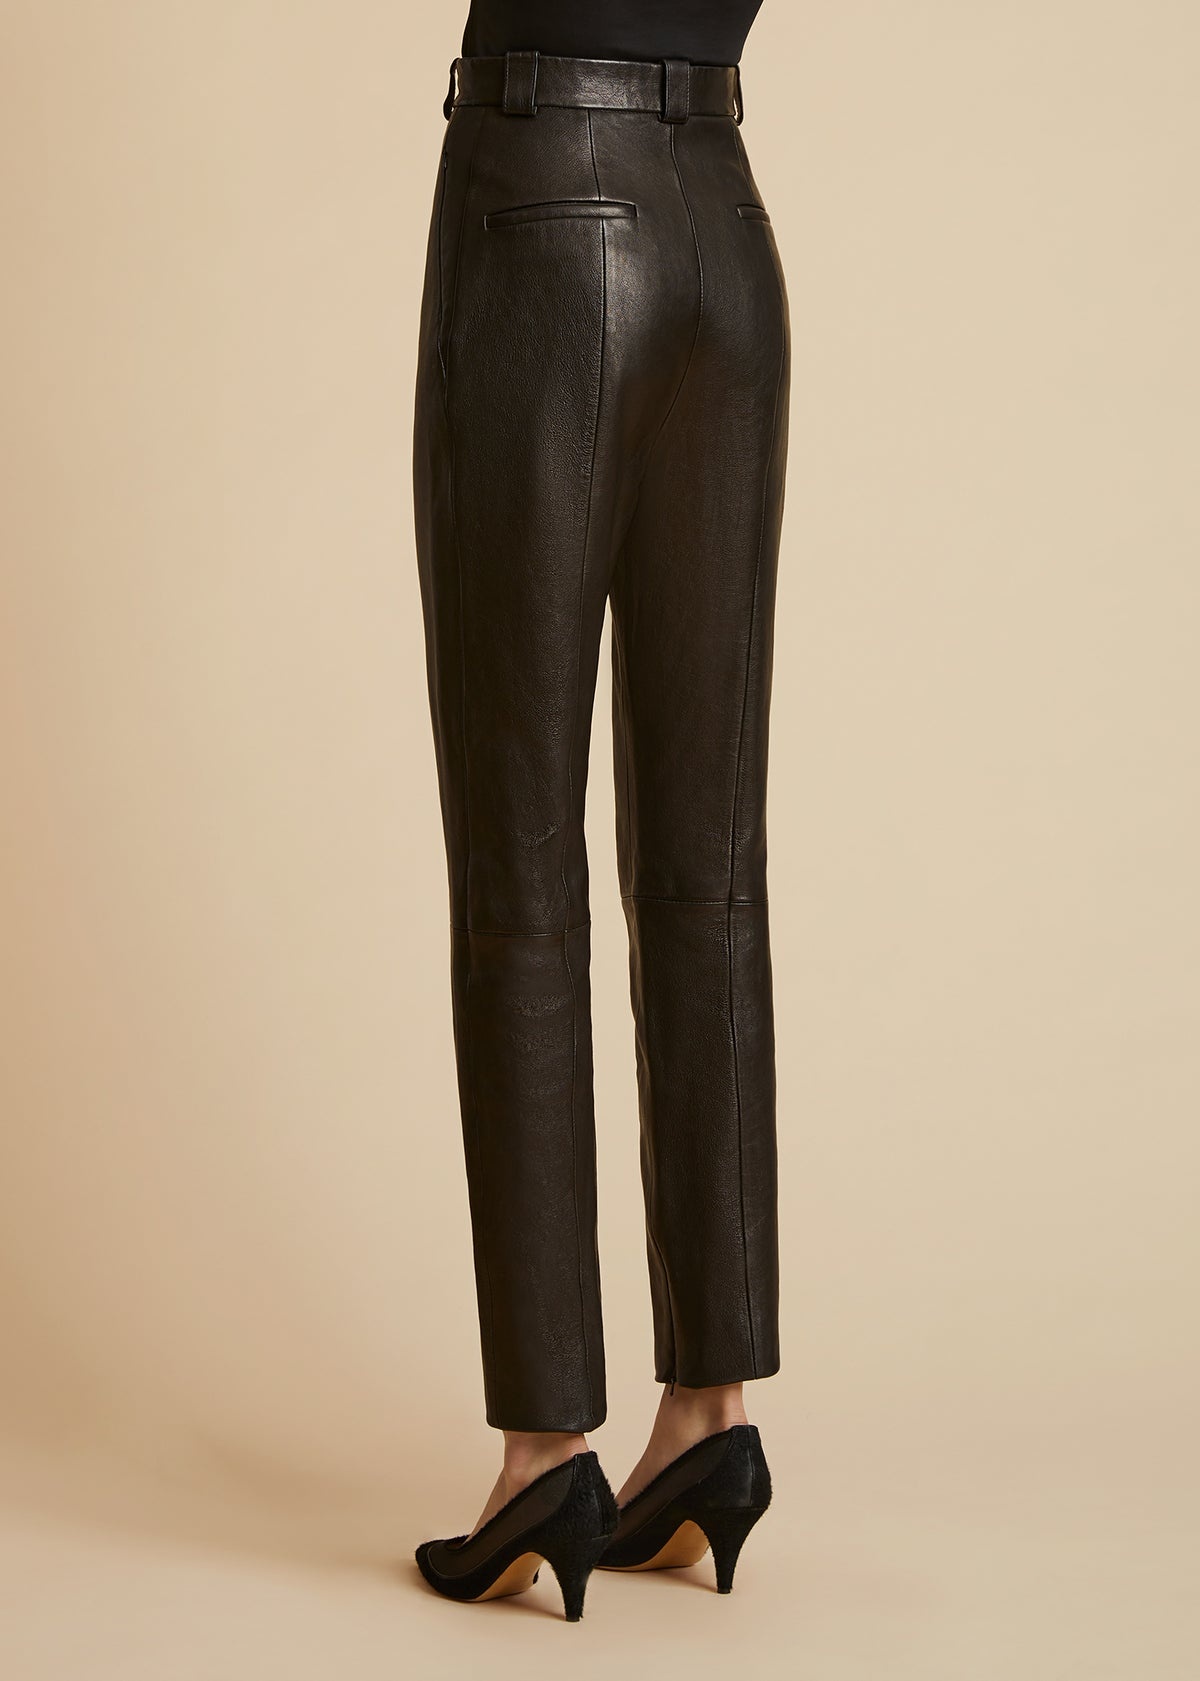 The Waylin Pant in Black Leather - 3